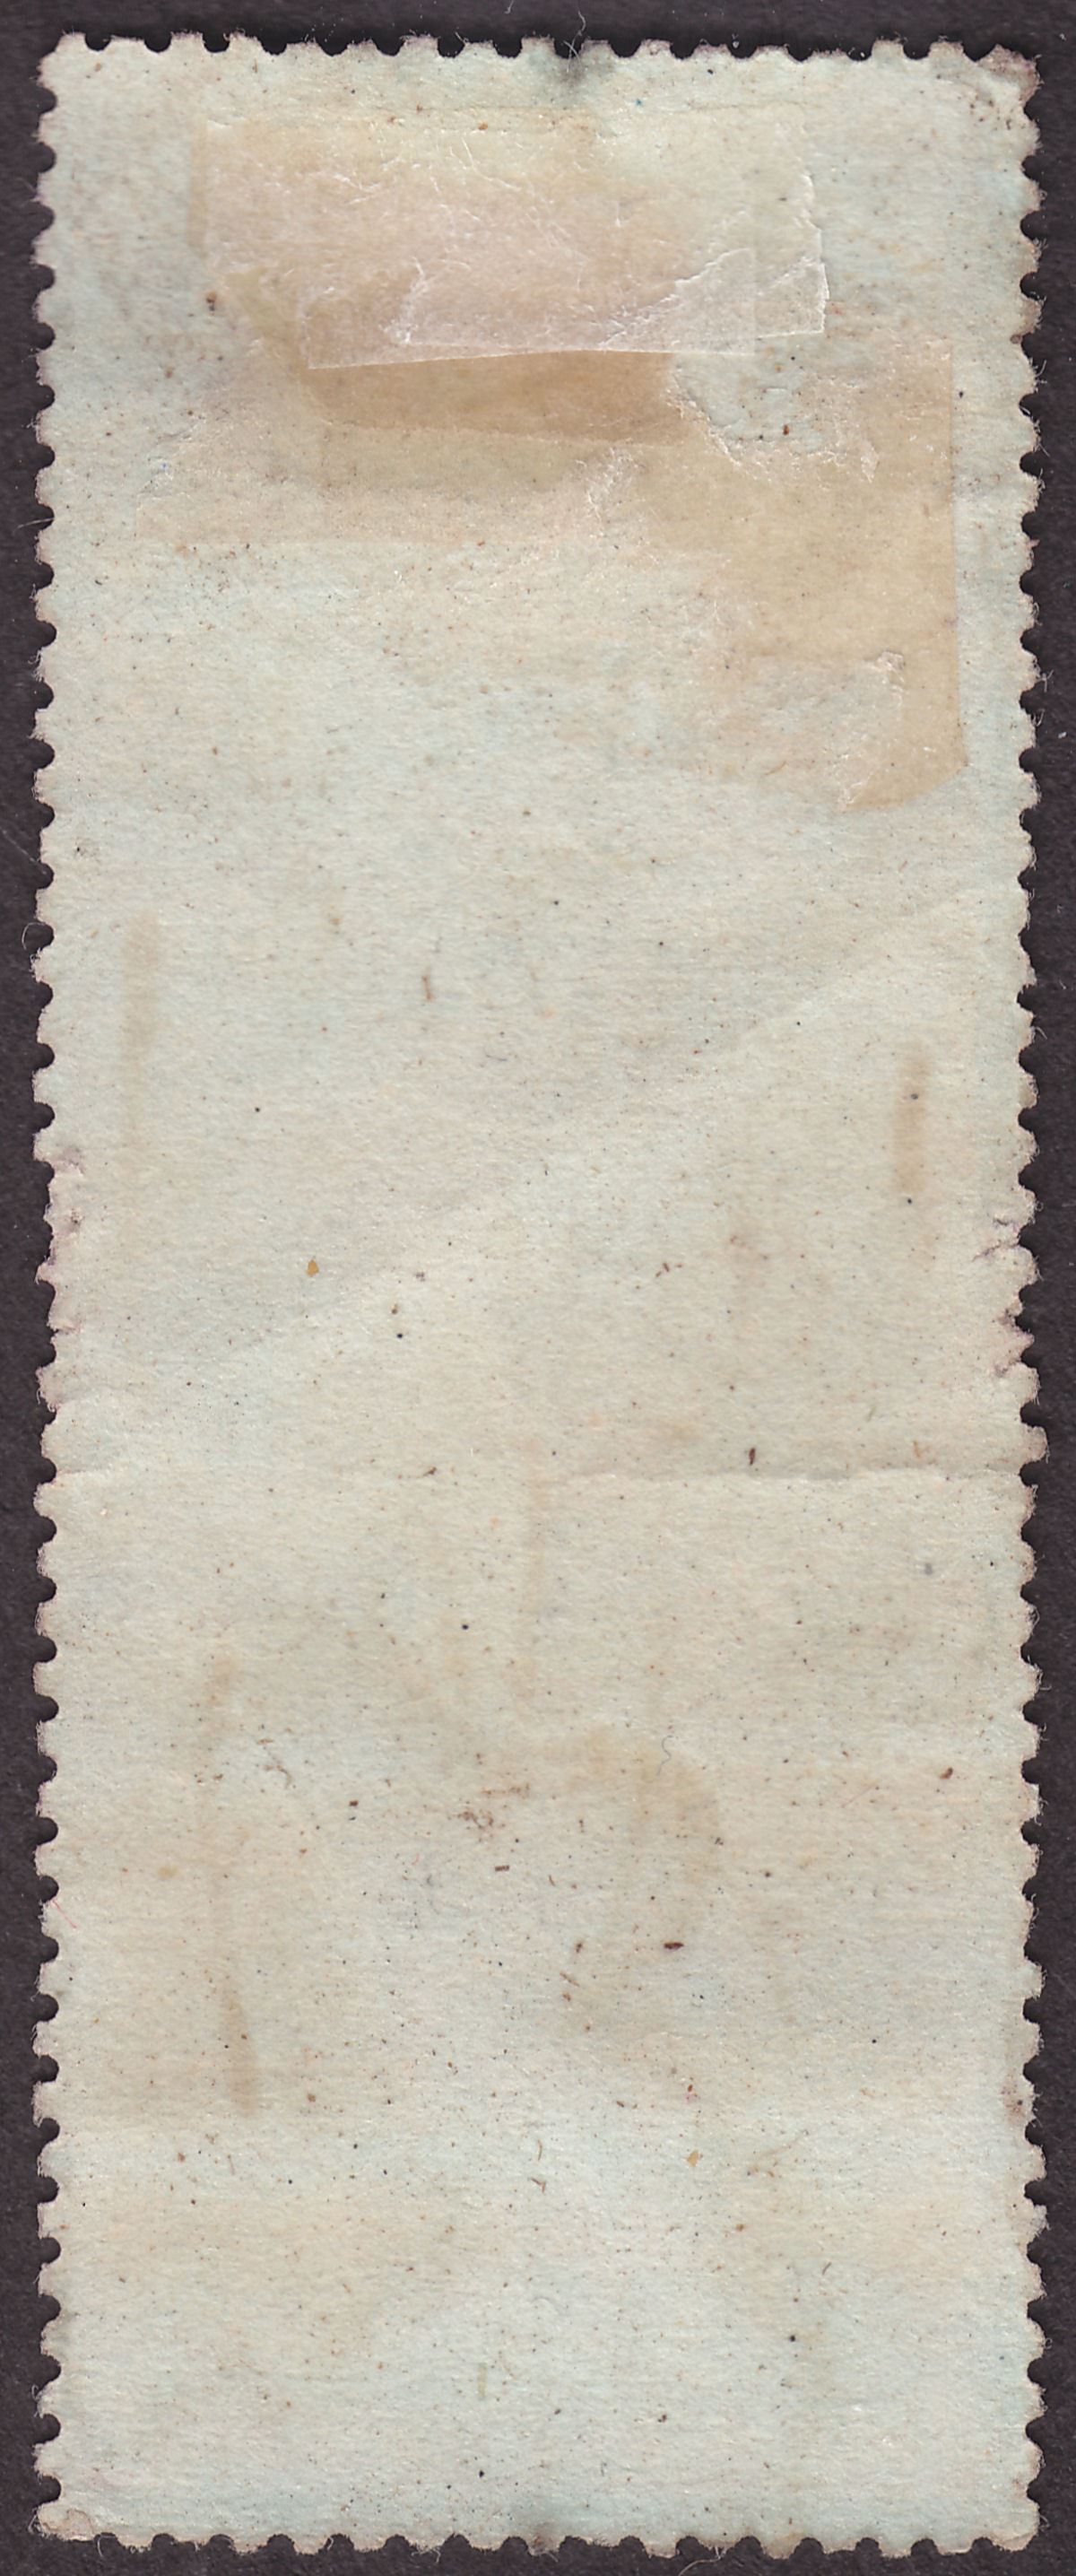 India 1879 QV Revenue Notarial Overprint 23mm Down Foreign Bill 1r Used BF10bB